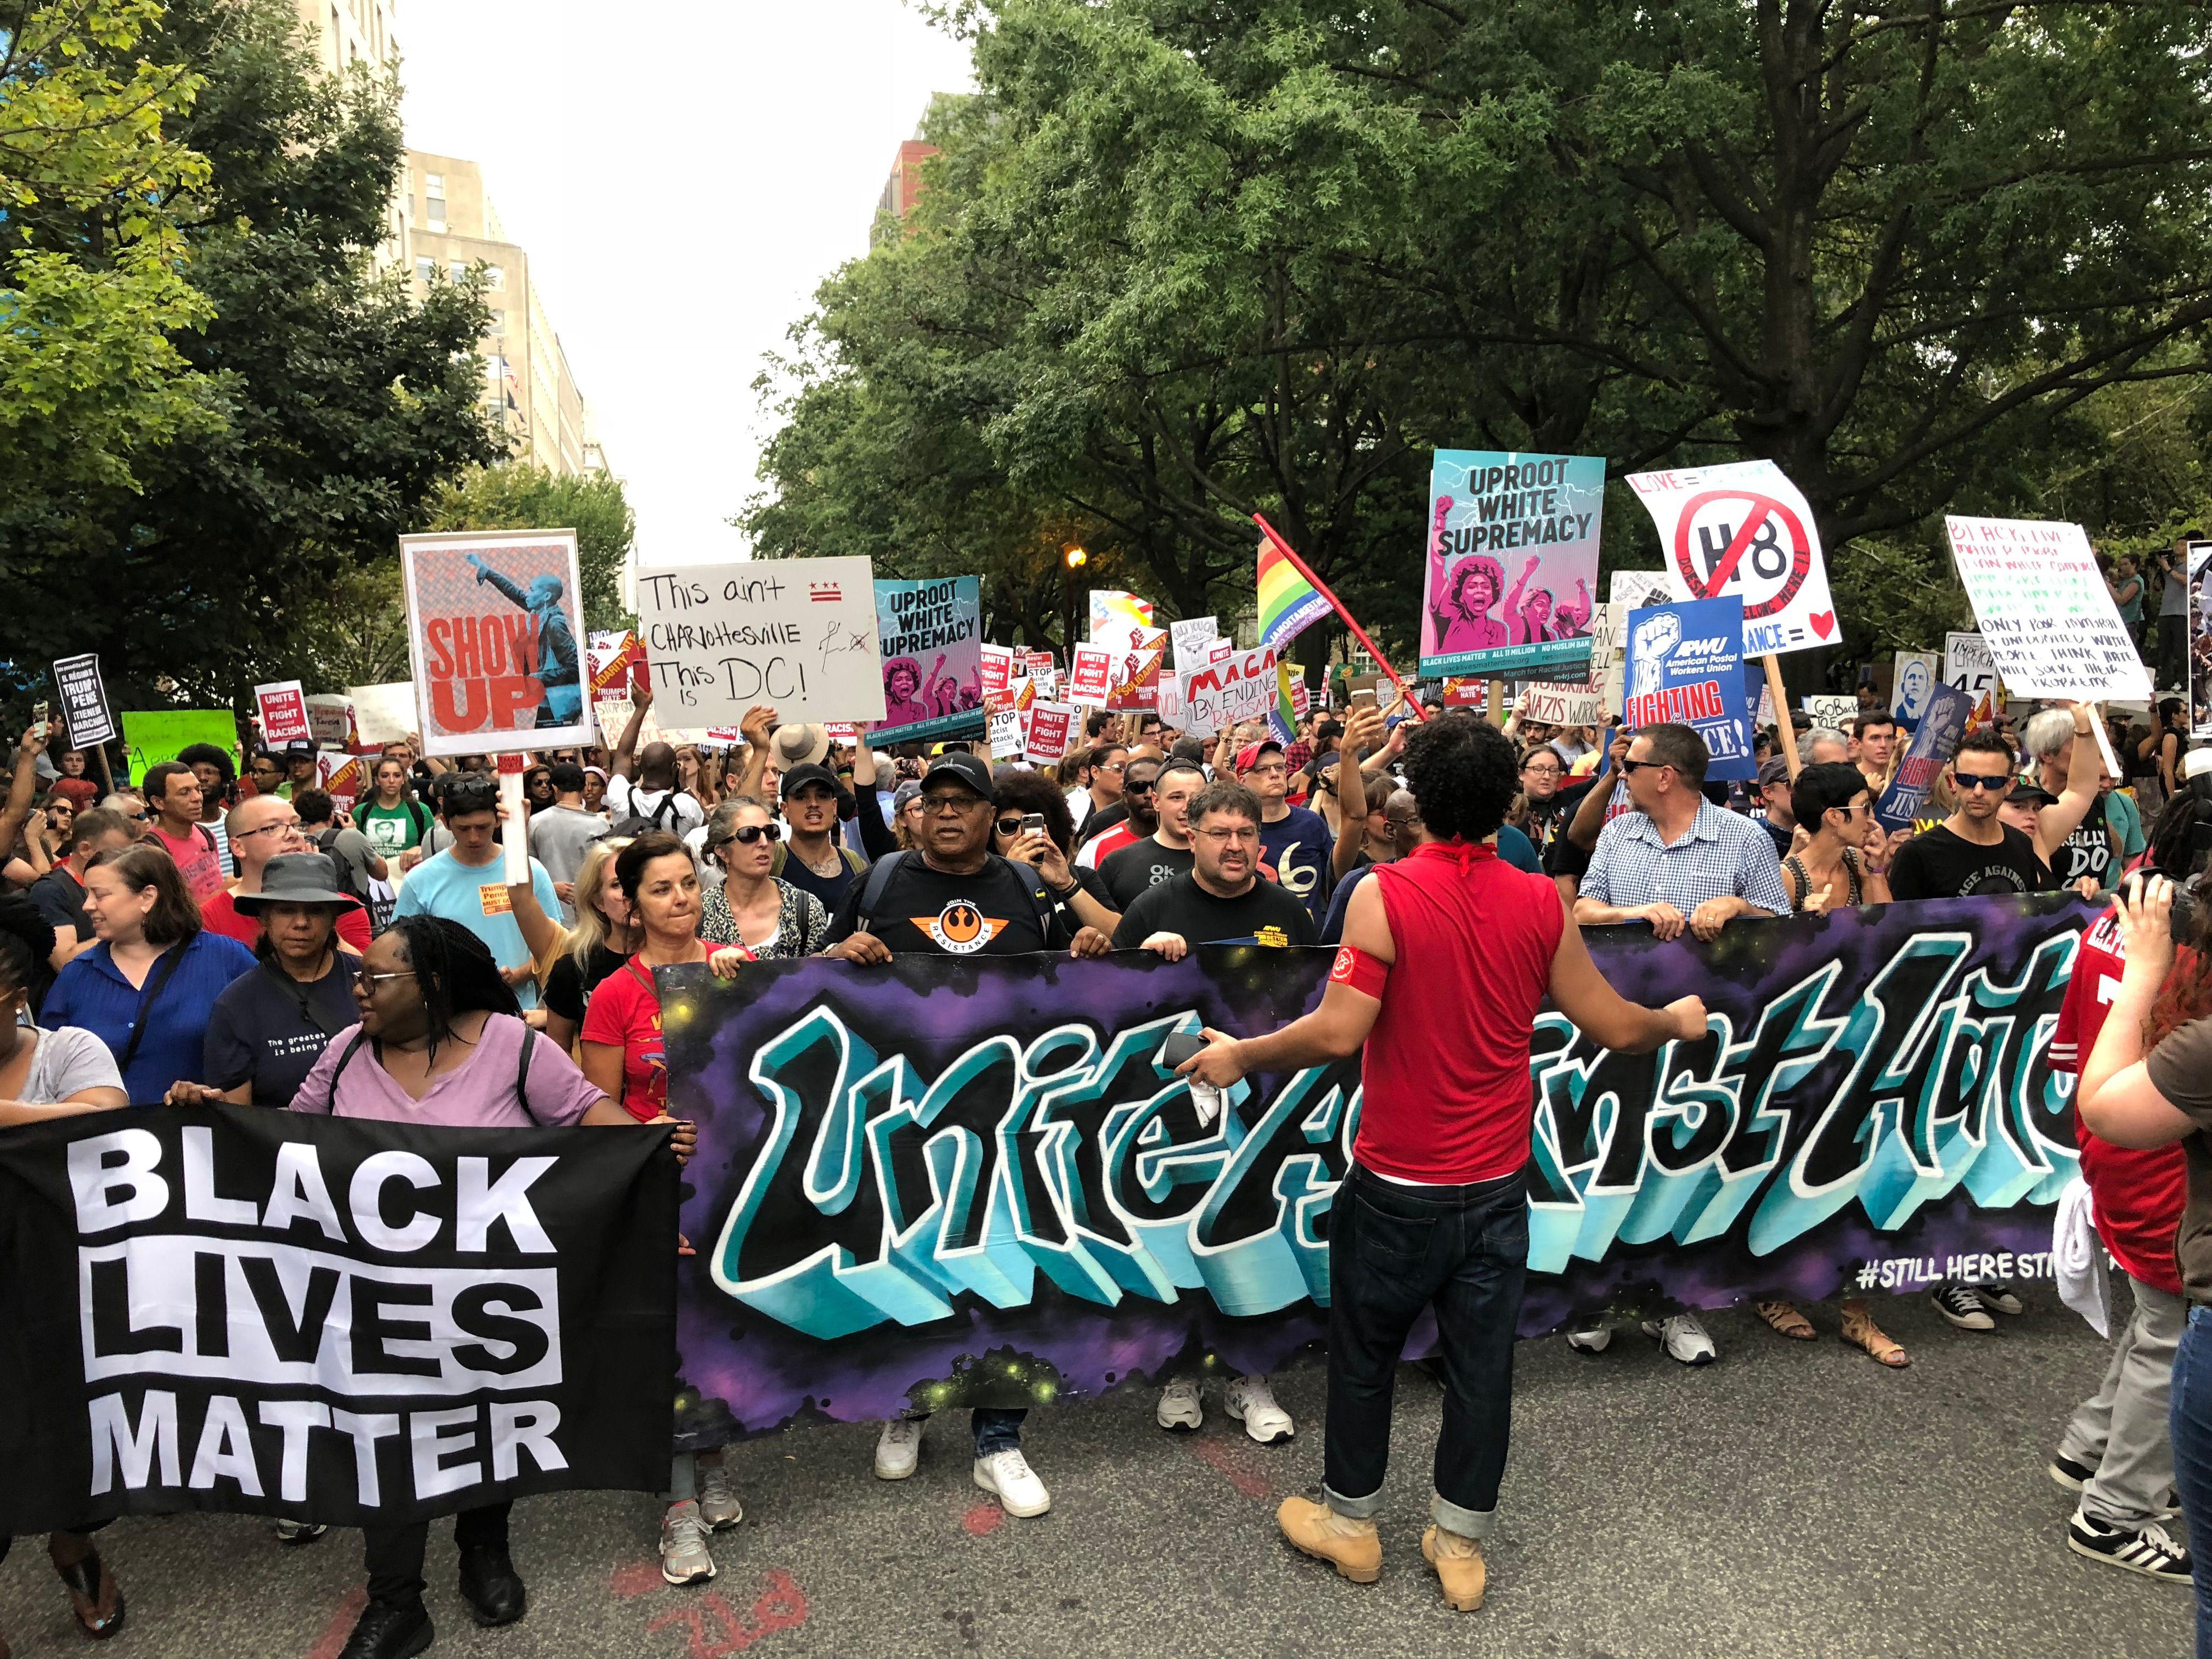 Protesters march against the far-right's Unite the Right rally August 12, 2018 in Washington, D.C.